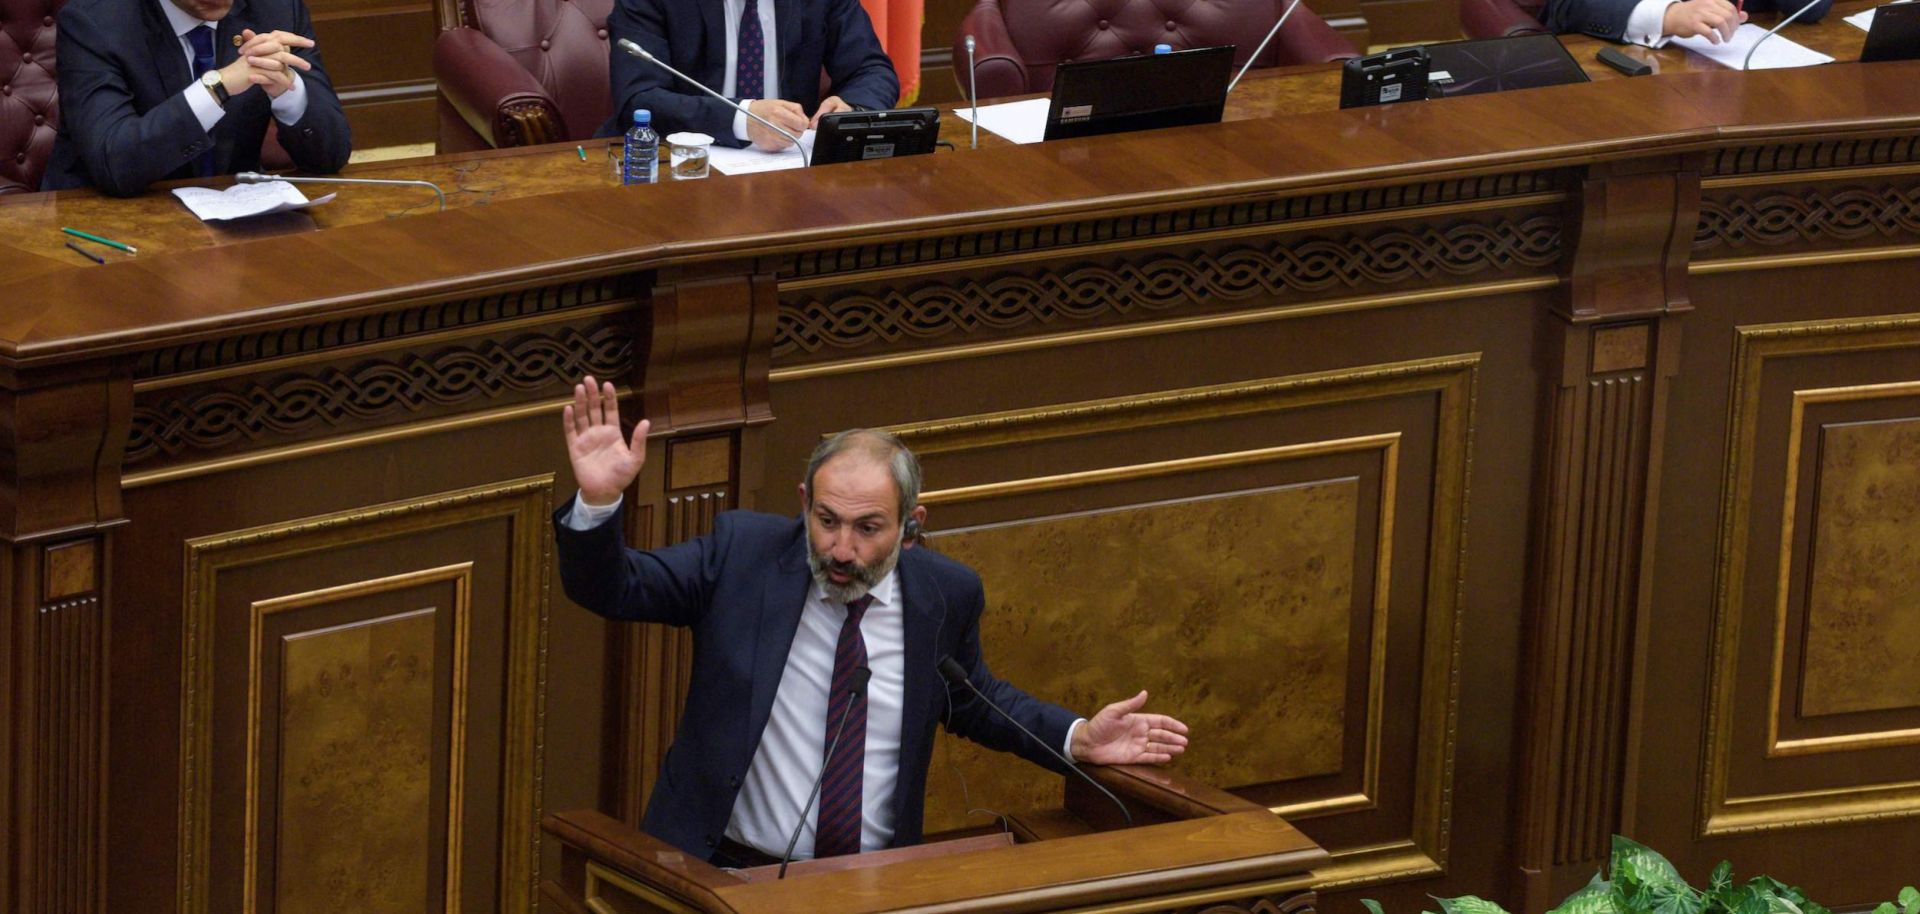 In this photo, Armenian opposition leader Nikol Pashinian speaks before parliament on May 1, 2018, during an extraordinary session to vote on a new prime minister.